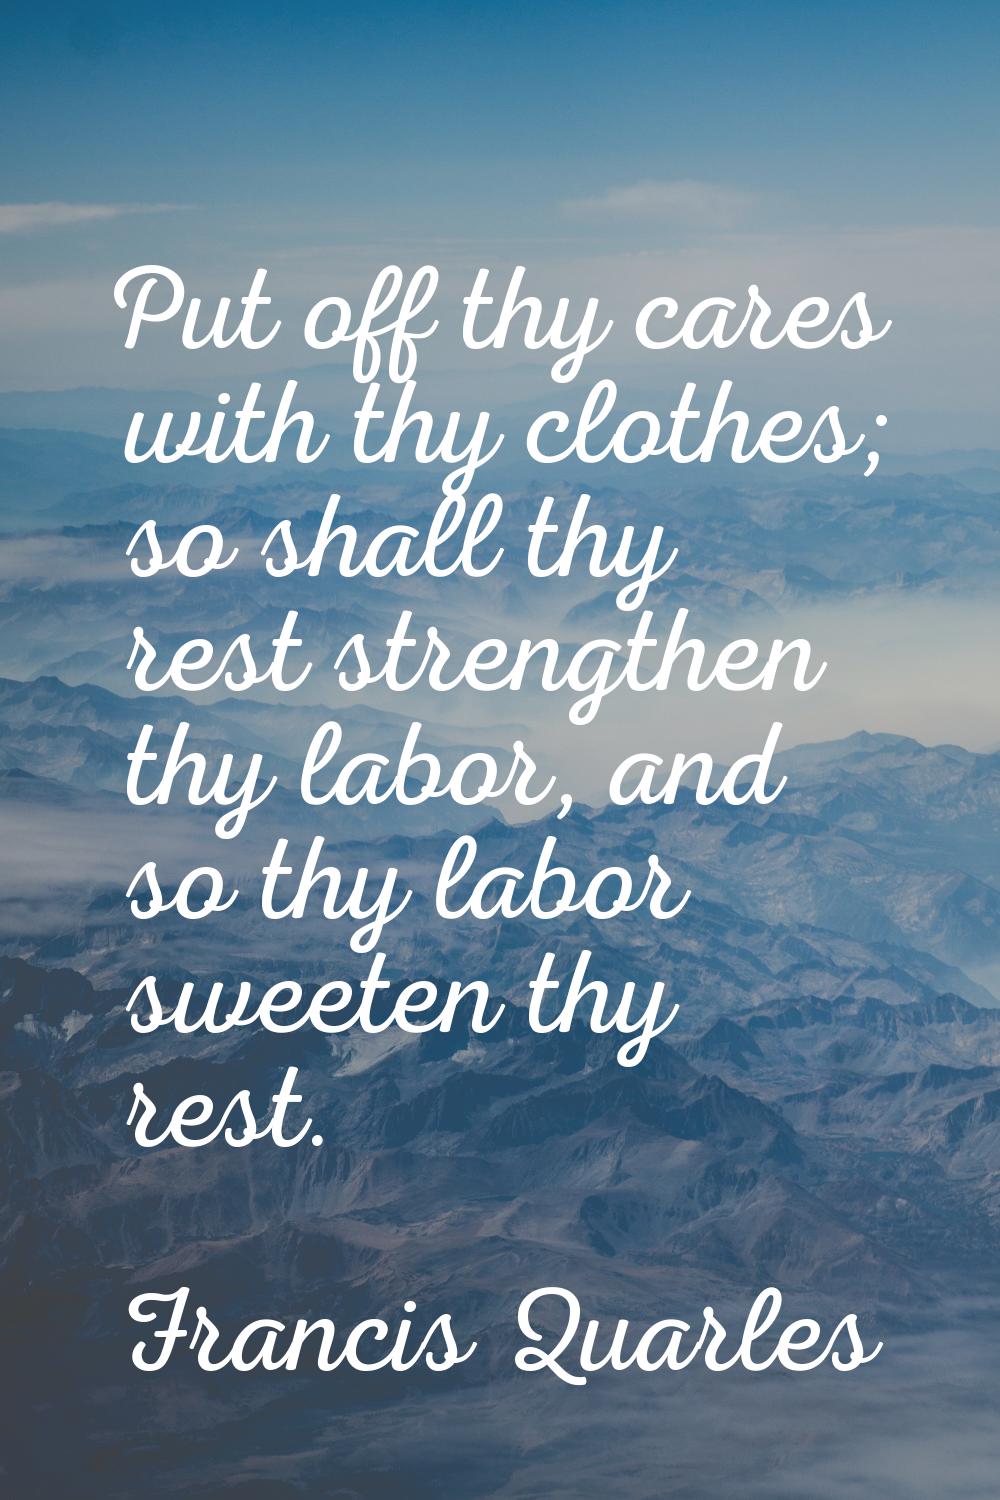 Put off thy cares with thy clothes; so shall thy rest strengthen thy labor, and so thy labor sweete